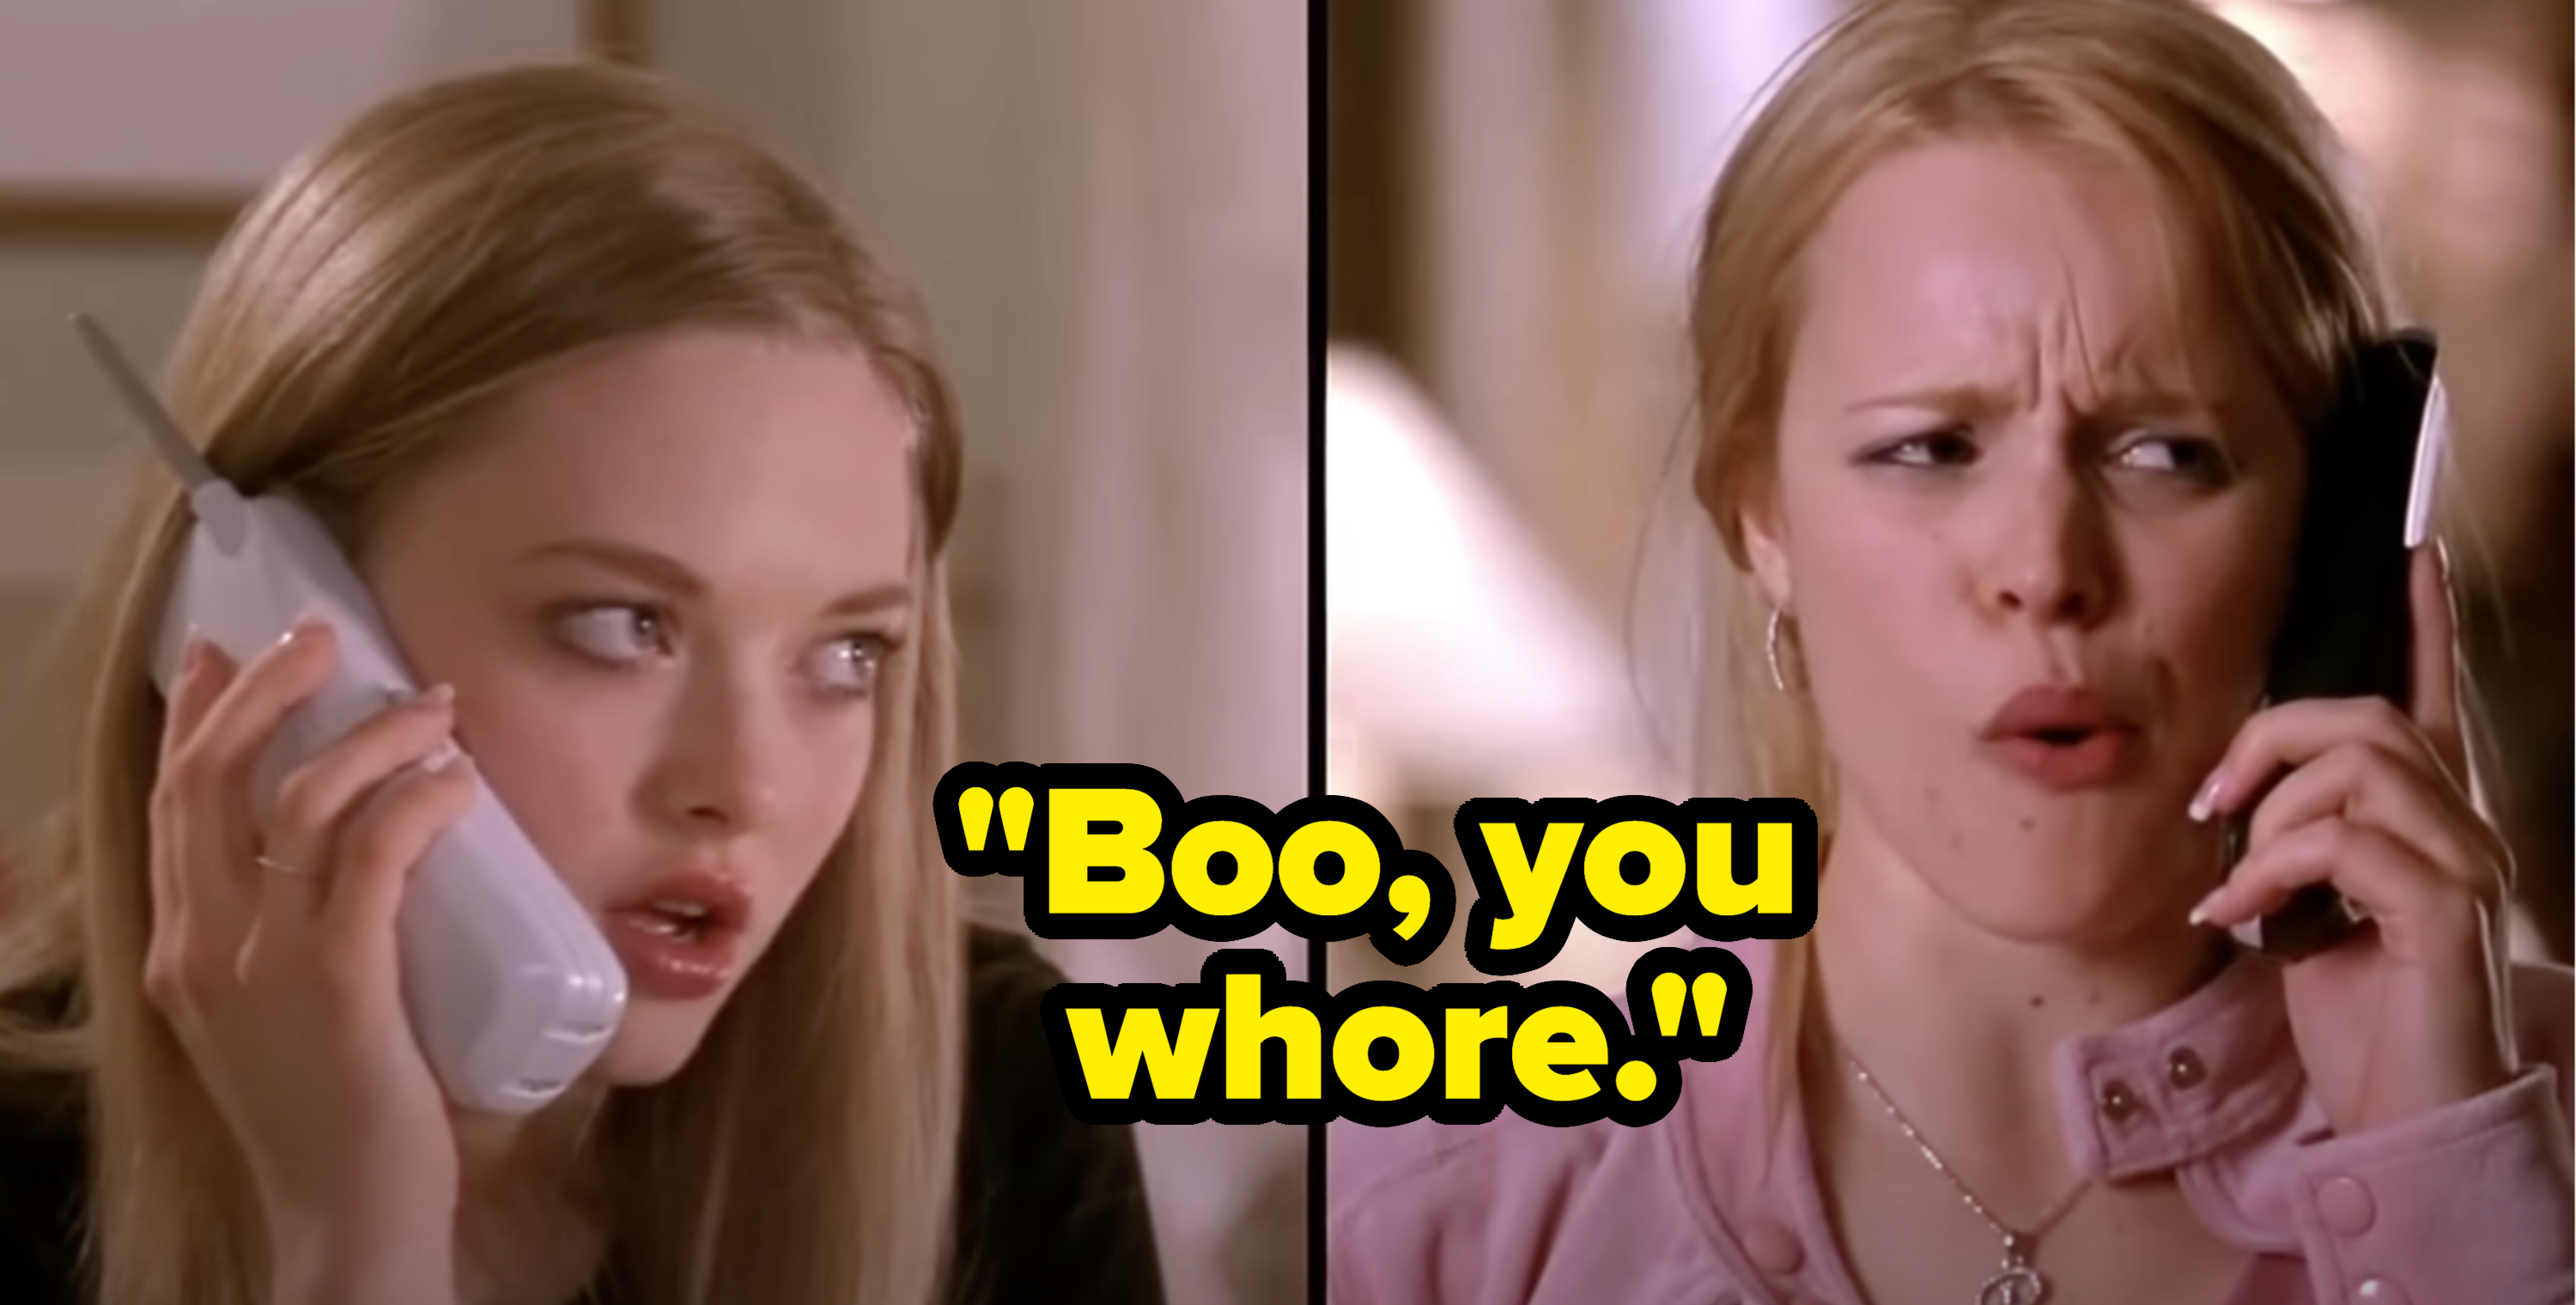 From left: Split screen of Karen Smith on the phone and Regina George also on the phone. Text reads: &quot;Boo, you whore.&quot;